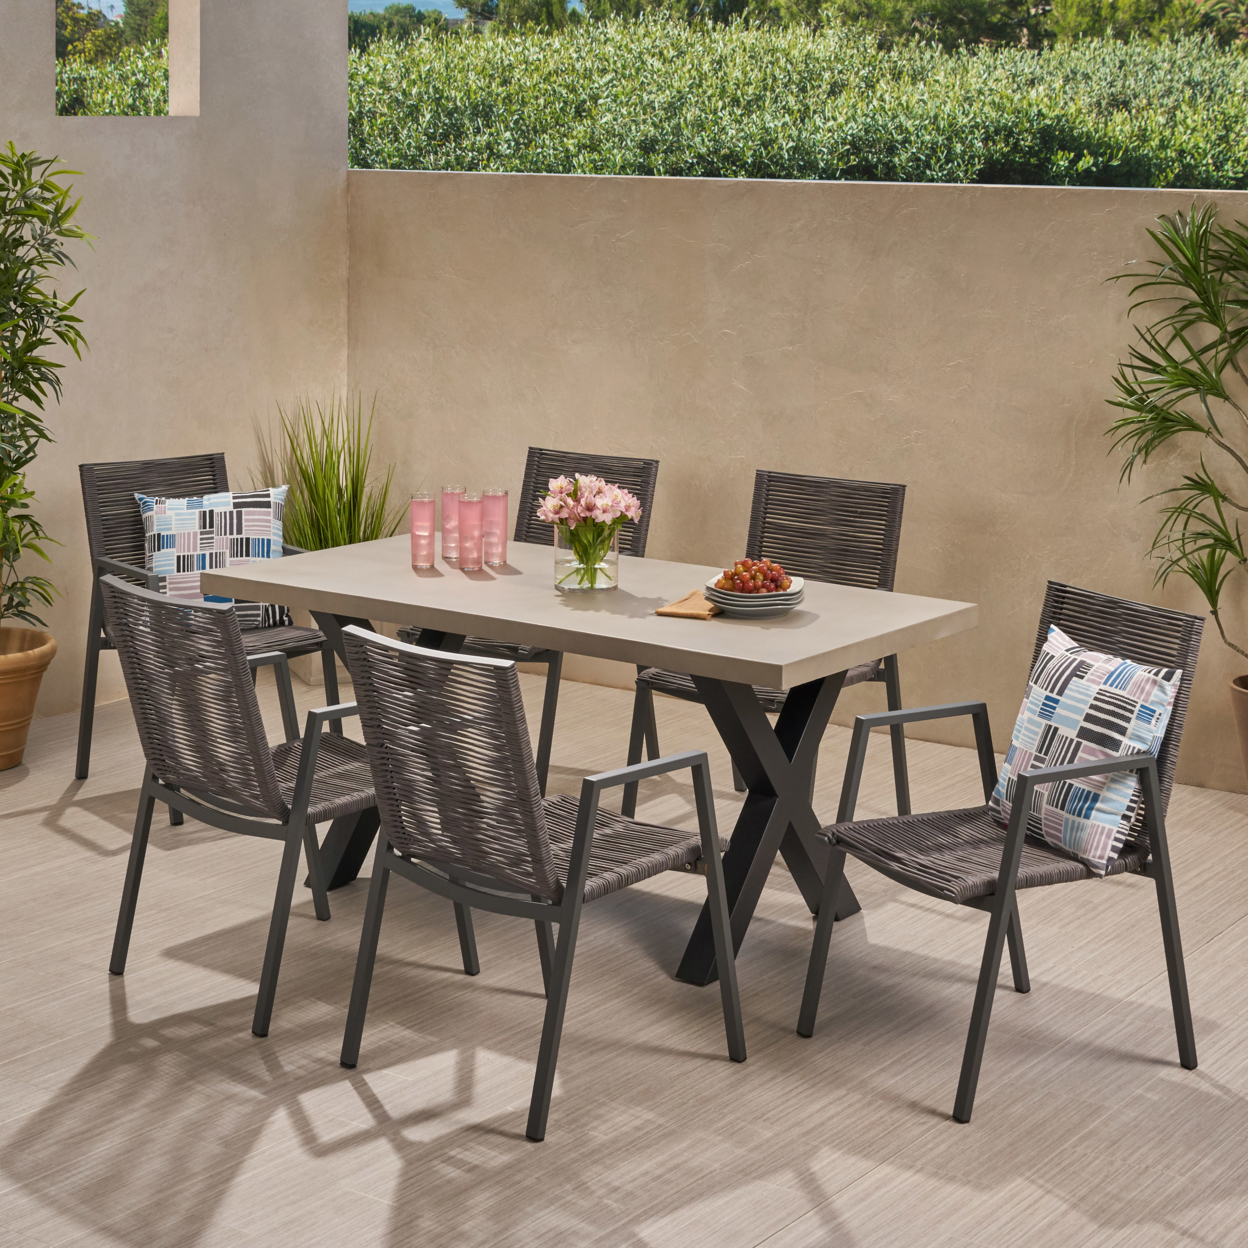 Wendy Outdoor Modern 6 Seater Dining Set